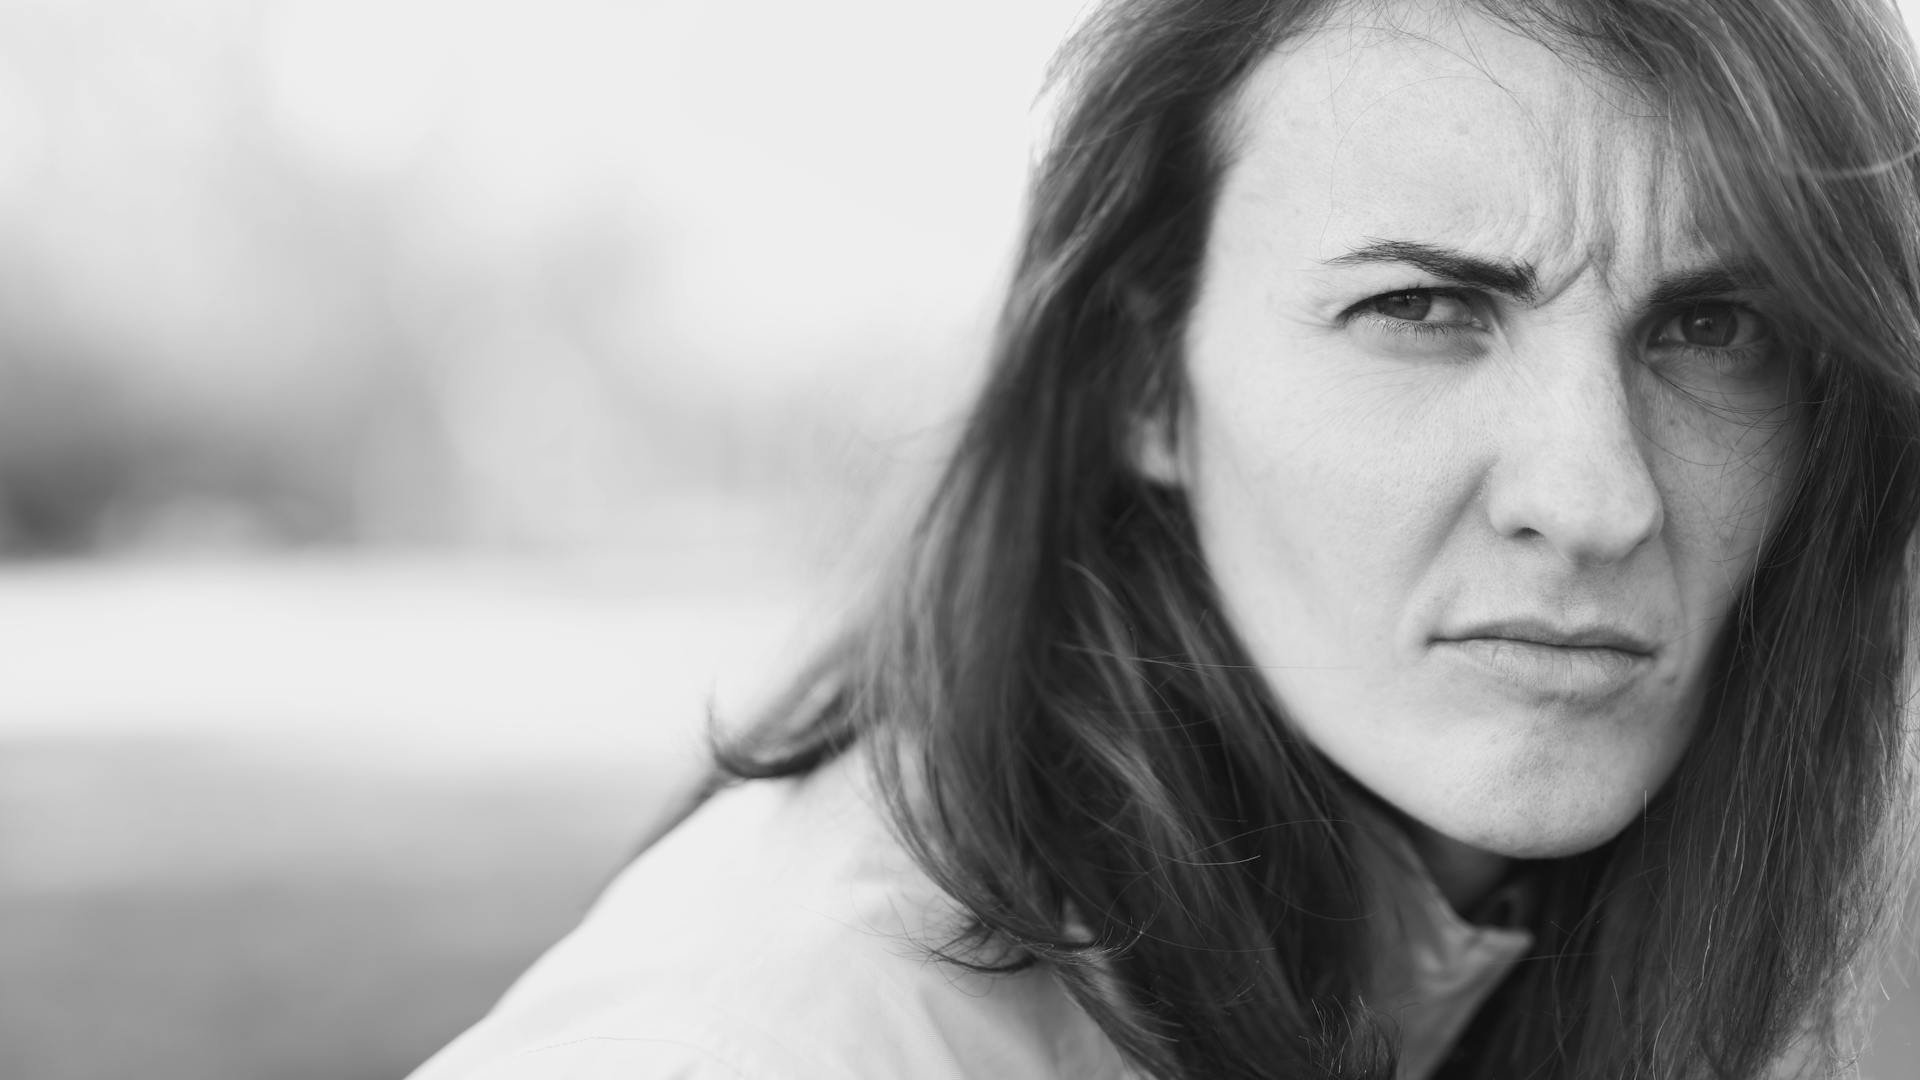 A heartbroken and angry woman | Source: Pexels